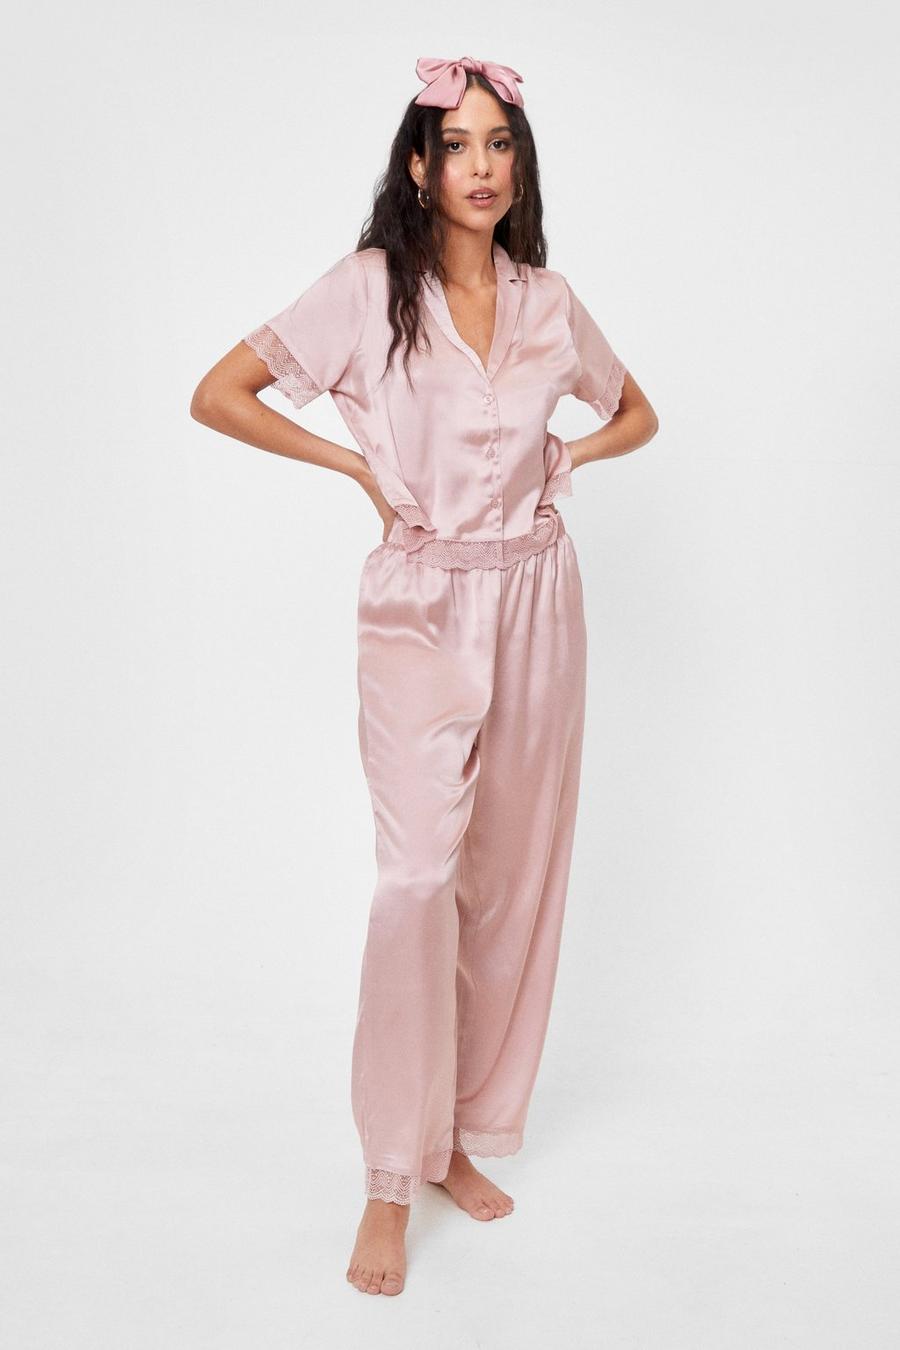 Invest in Rest Satin Lace Pants Pajama Set